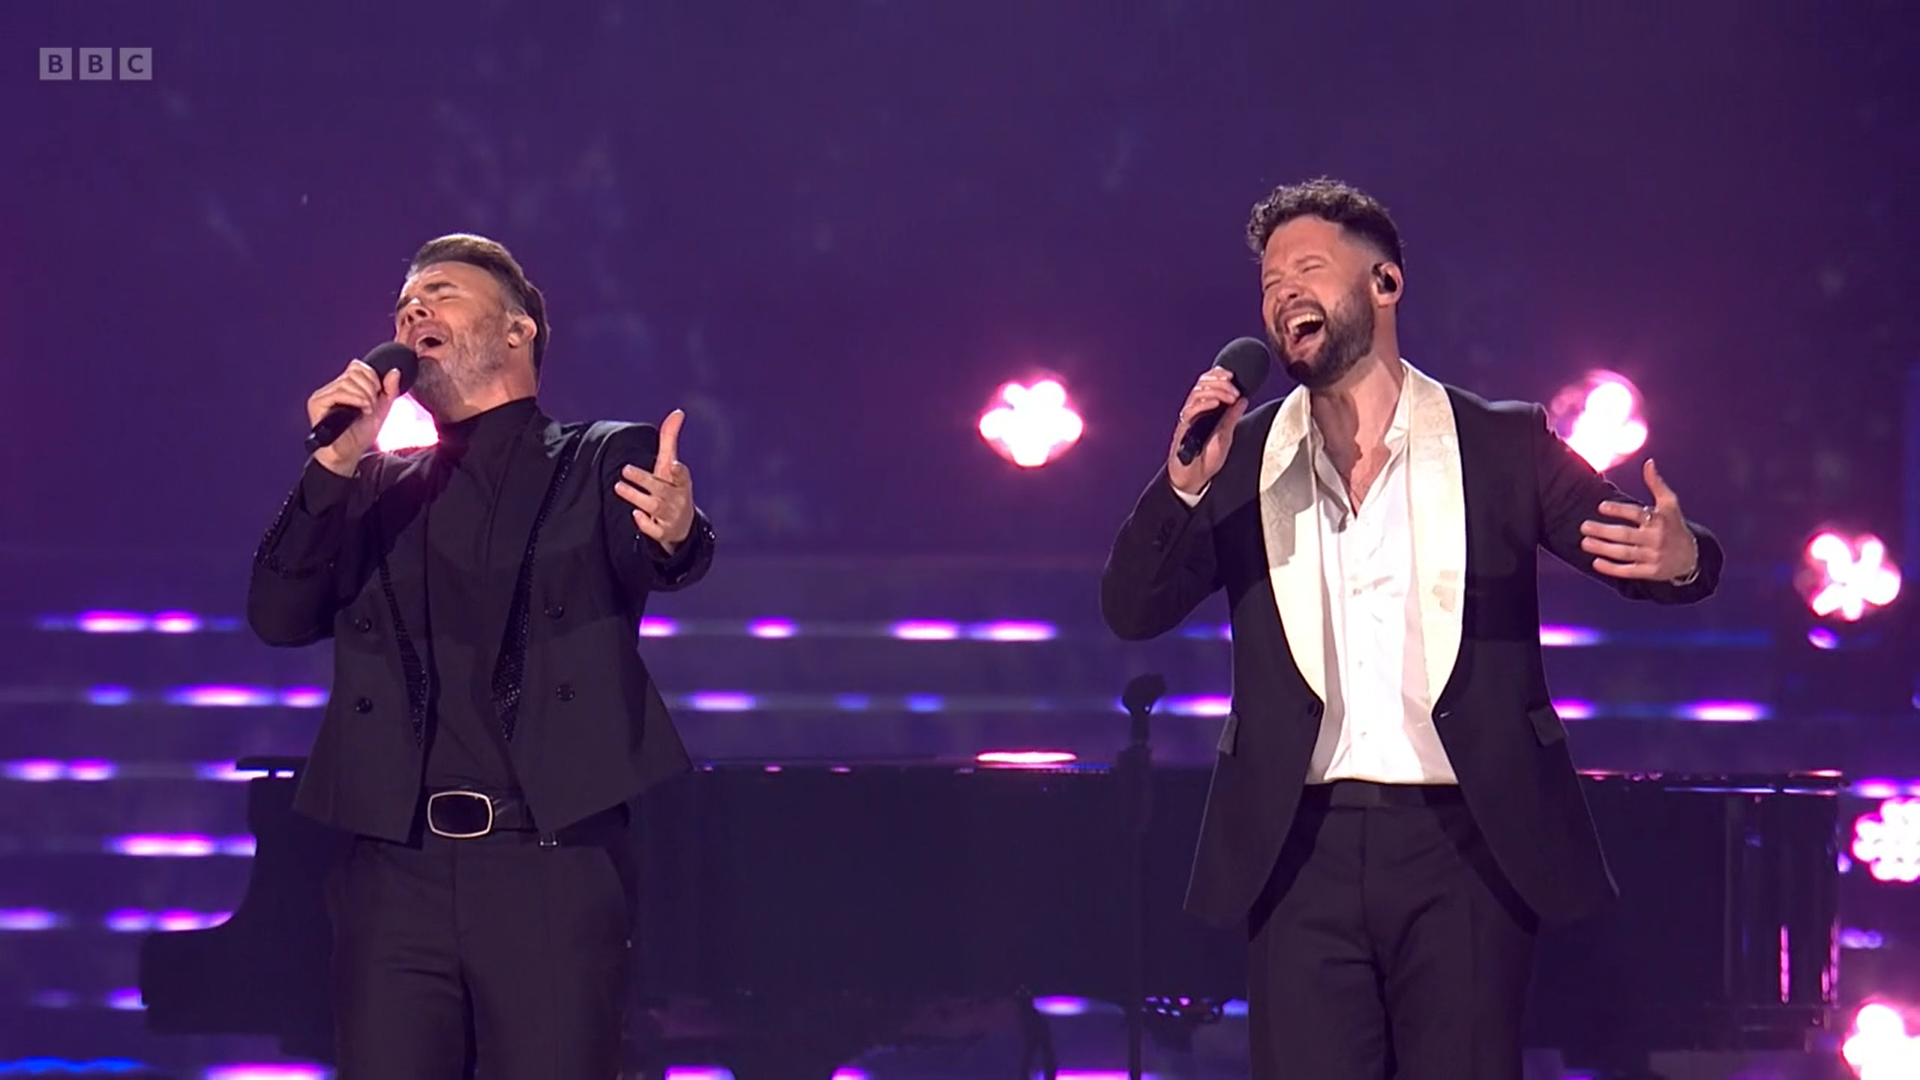 Take That at the coronation concert